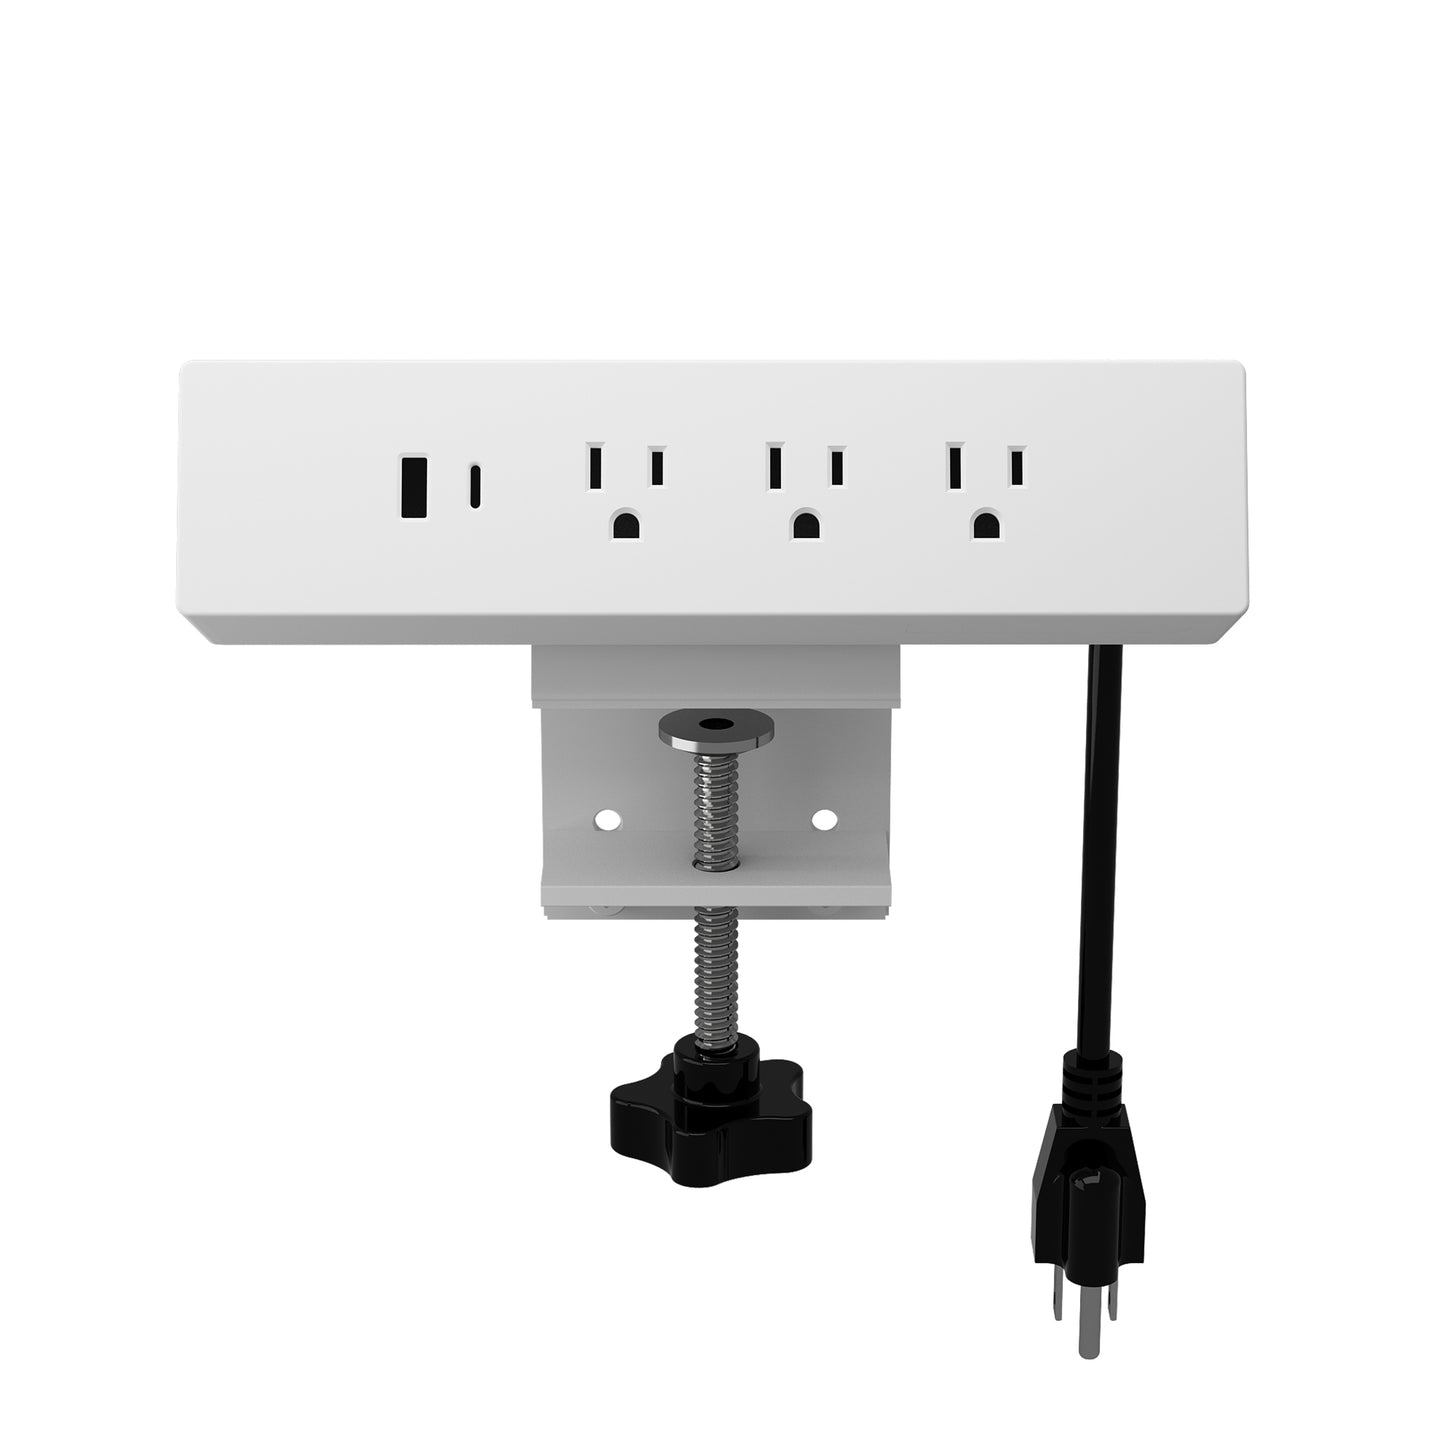 ALFA Desk Clamp Power Strip with USB C Ports, 3 Outlet，AC Outlet Extender, Desk Mount USB Charging Power Station, Cloud White